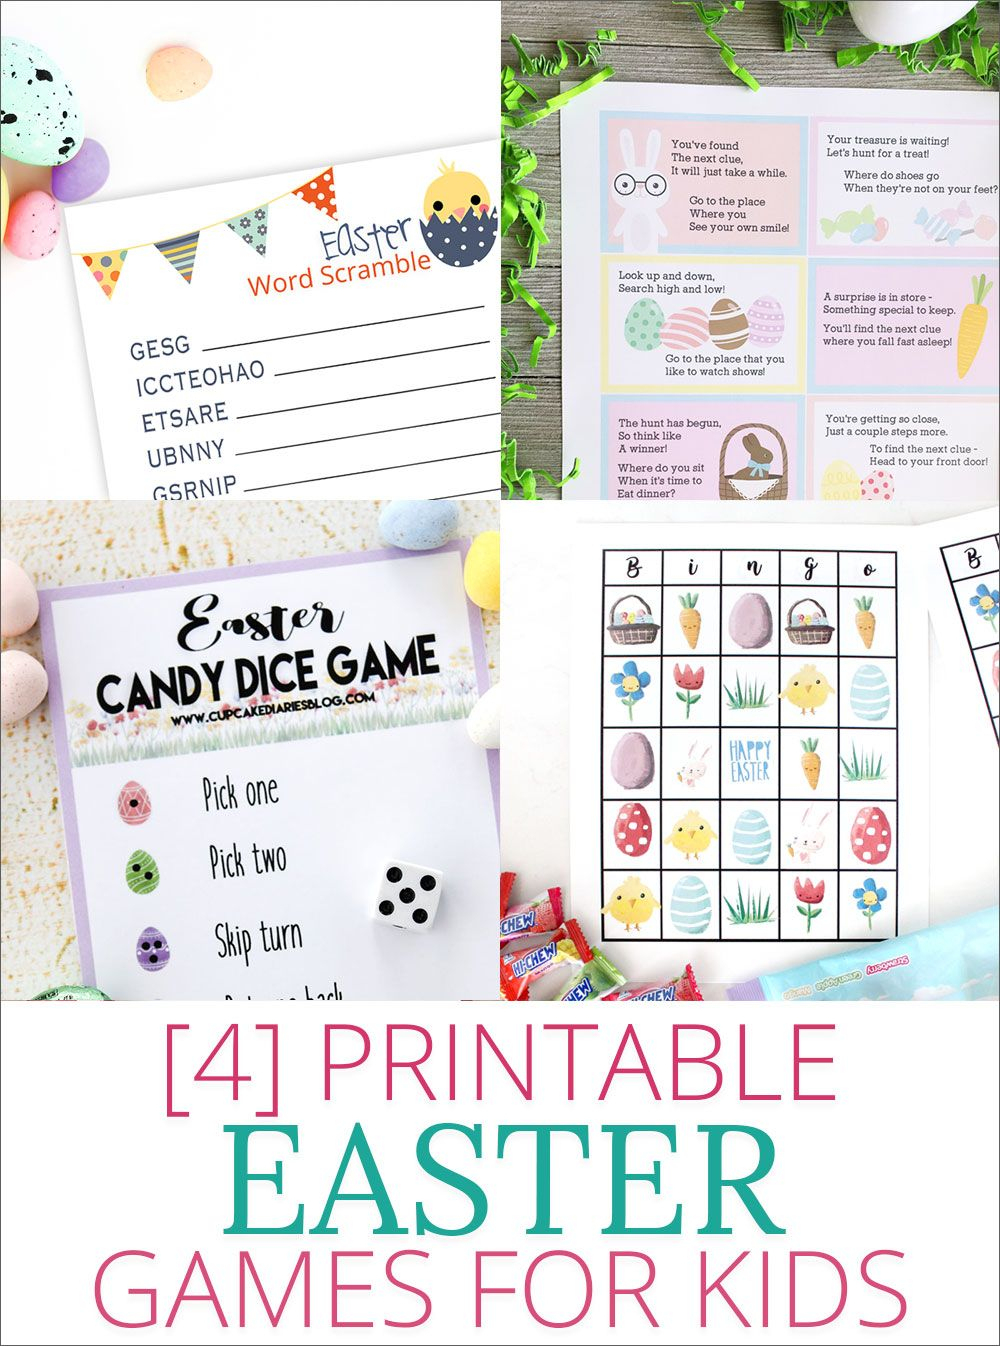 Free Printable Easter Bingo | For The Grandkiddies | Pinterest - Easter Games For Adults Printable Free